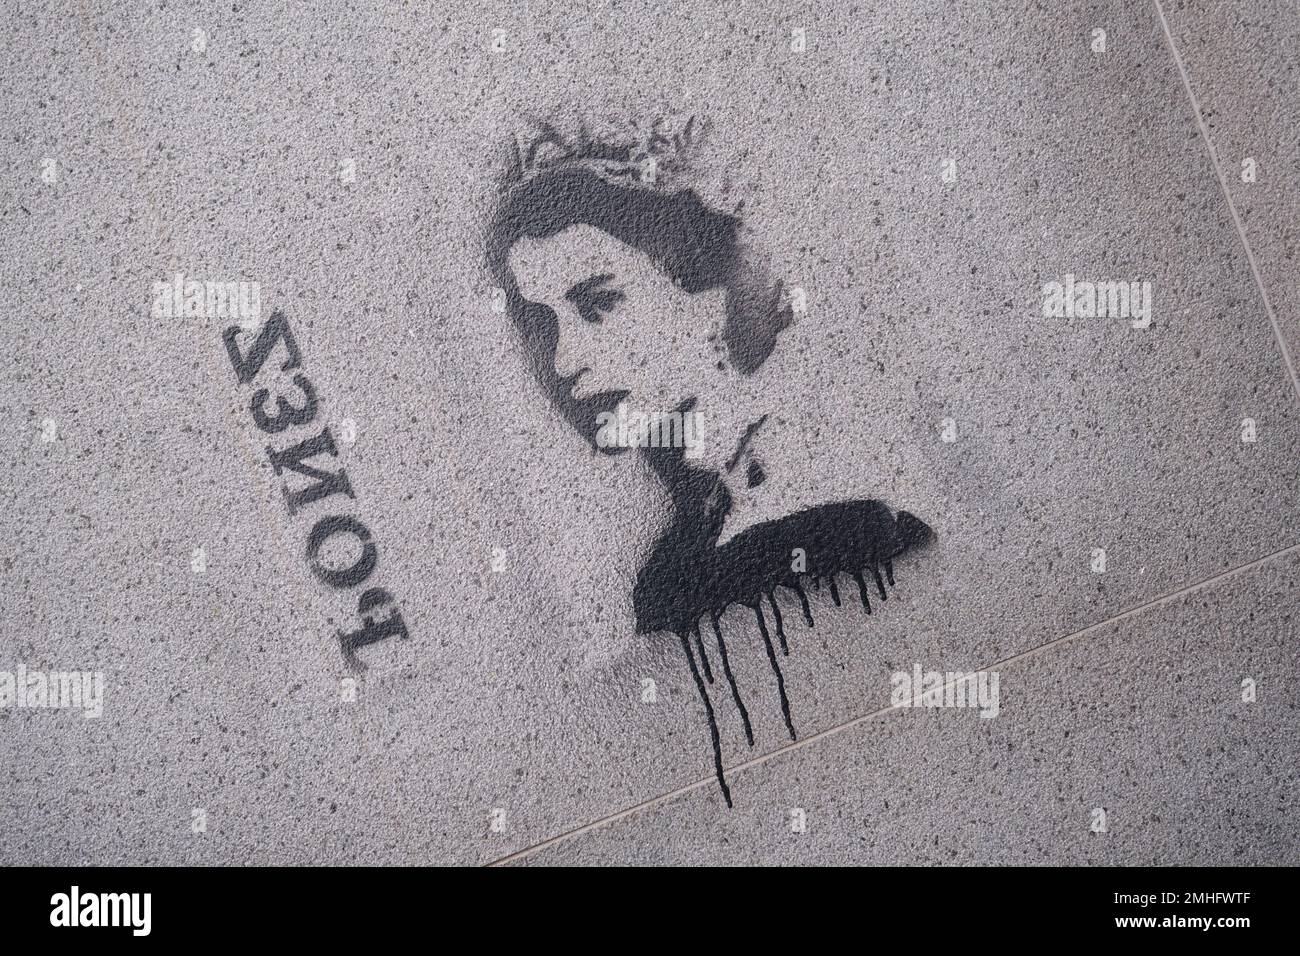 A painted stencil by the artist Bones of Queen Elizabeth II. At a Metro station entrance. An example of graffiti in Naples, Napoli, Italy, Italia. Stock Photo